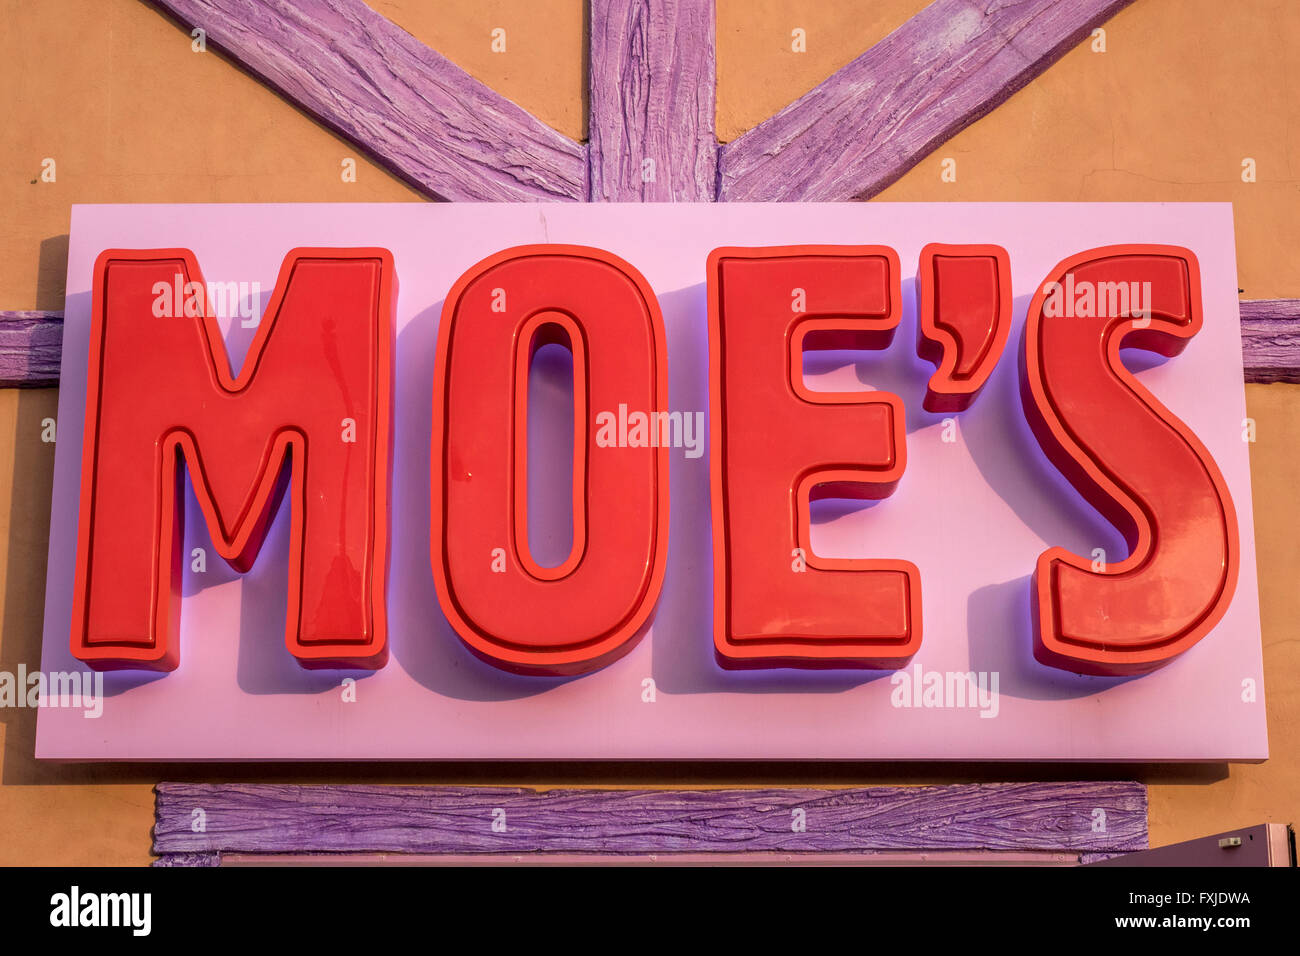 Bar Sign Of Moe's From Simpsons TV Show At Universal Studios Orlando  Florida Stock Photo - Alamy